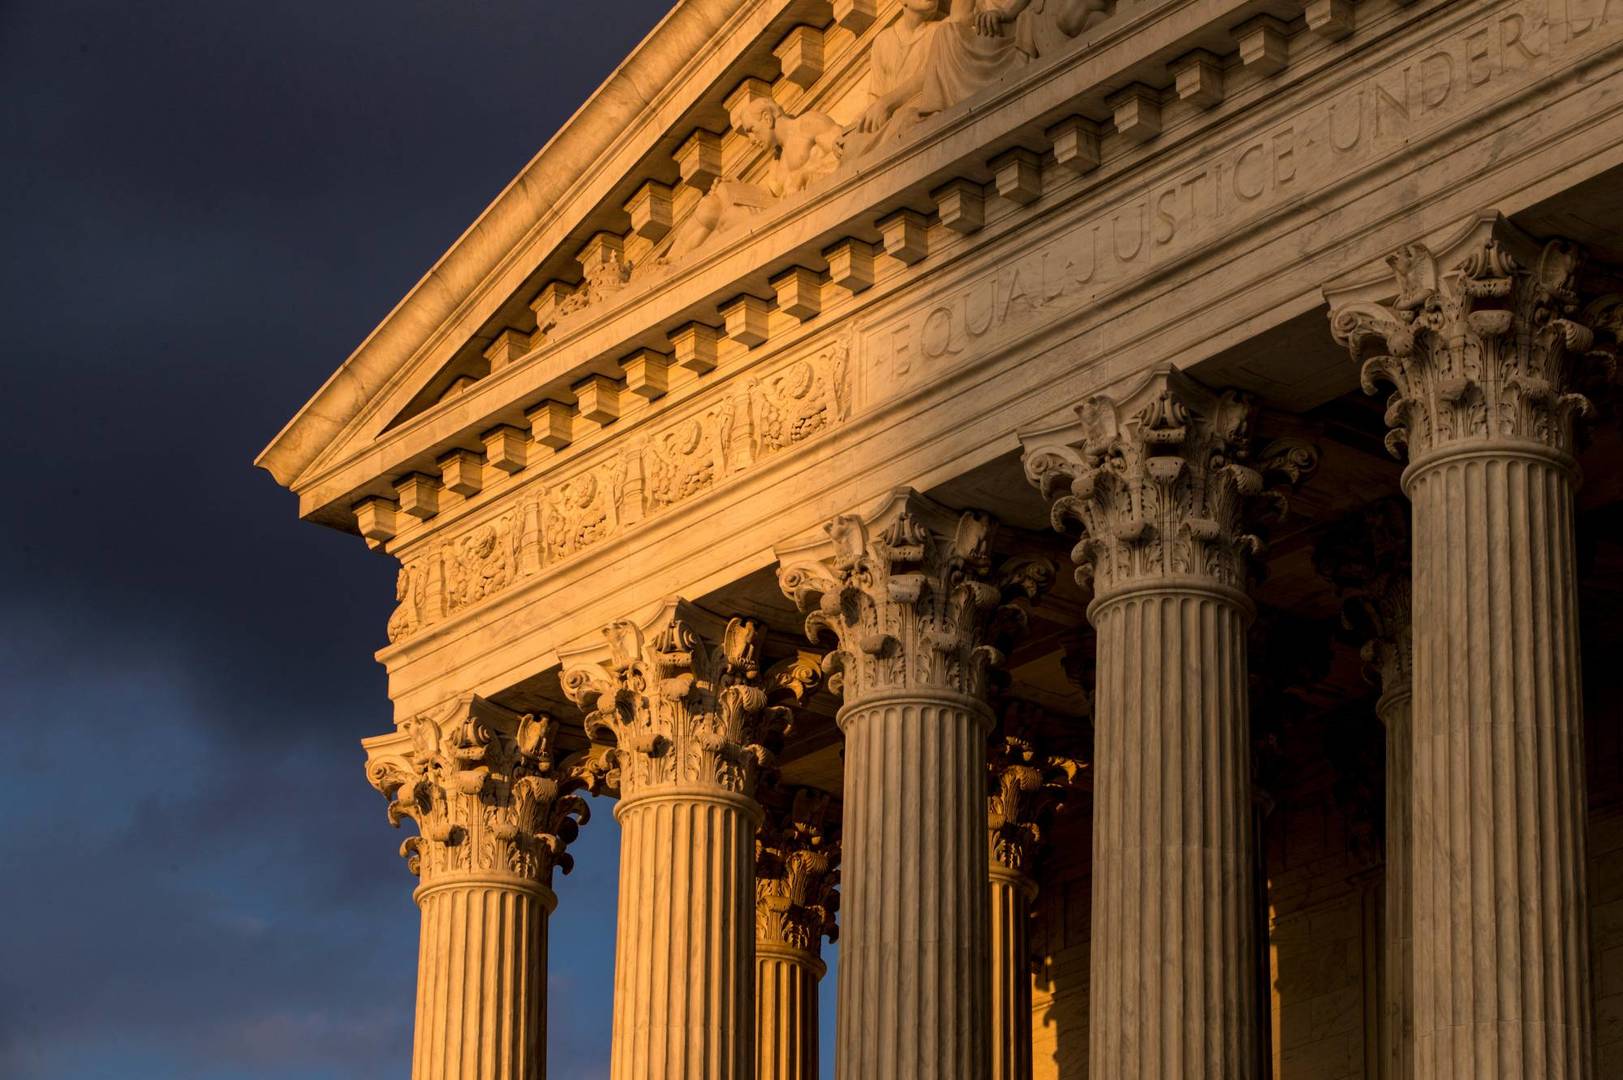 FILE - In this Oct. 10, 2017, file photo, the Supreme Court in Washington is seen at sunset.  The Supreme Court announced Aug. 23, 2019, that says Justice Ruth Bader Ginsburg has completed radiation therapy for a tumor on her pancreas and there is no evidence of the disease remaining.. (AP Photo/J. Scott Applewhite, File)